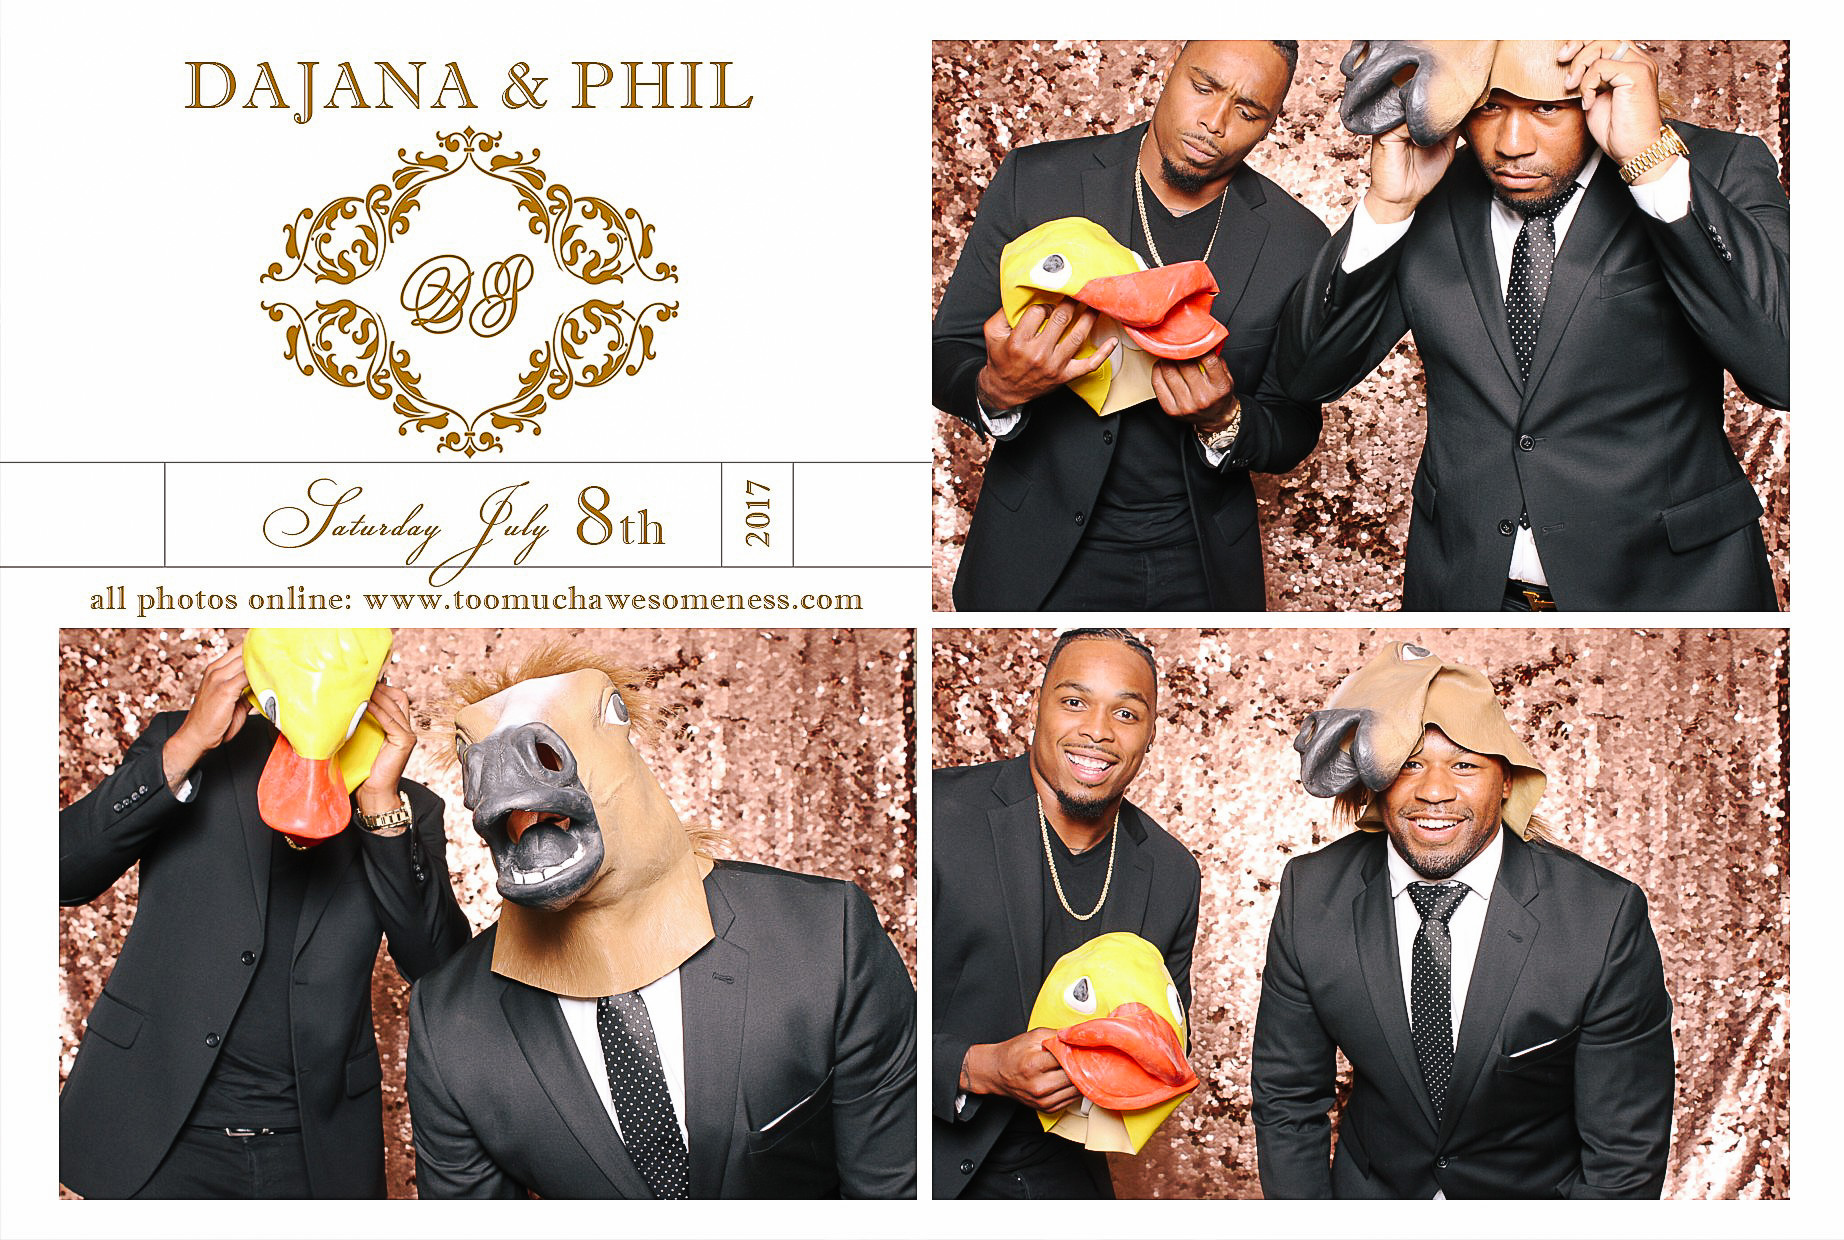 00284 Dajana and Phil Taylor Wedding Photos photobooth by too much awesomeness.jpg